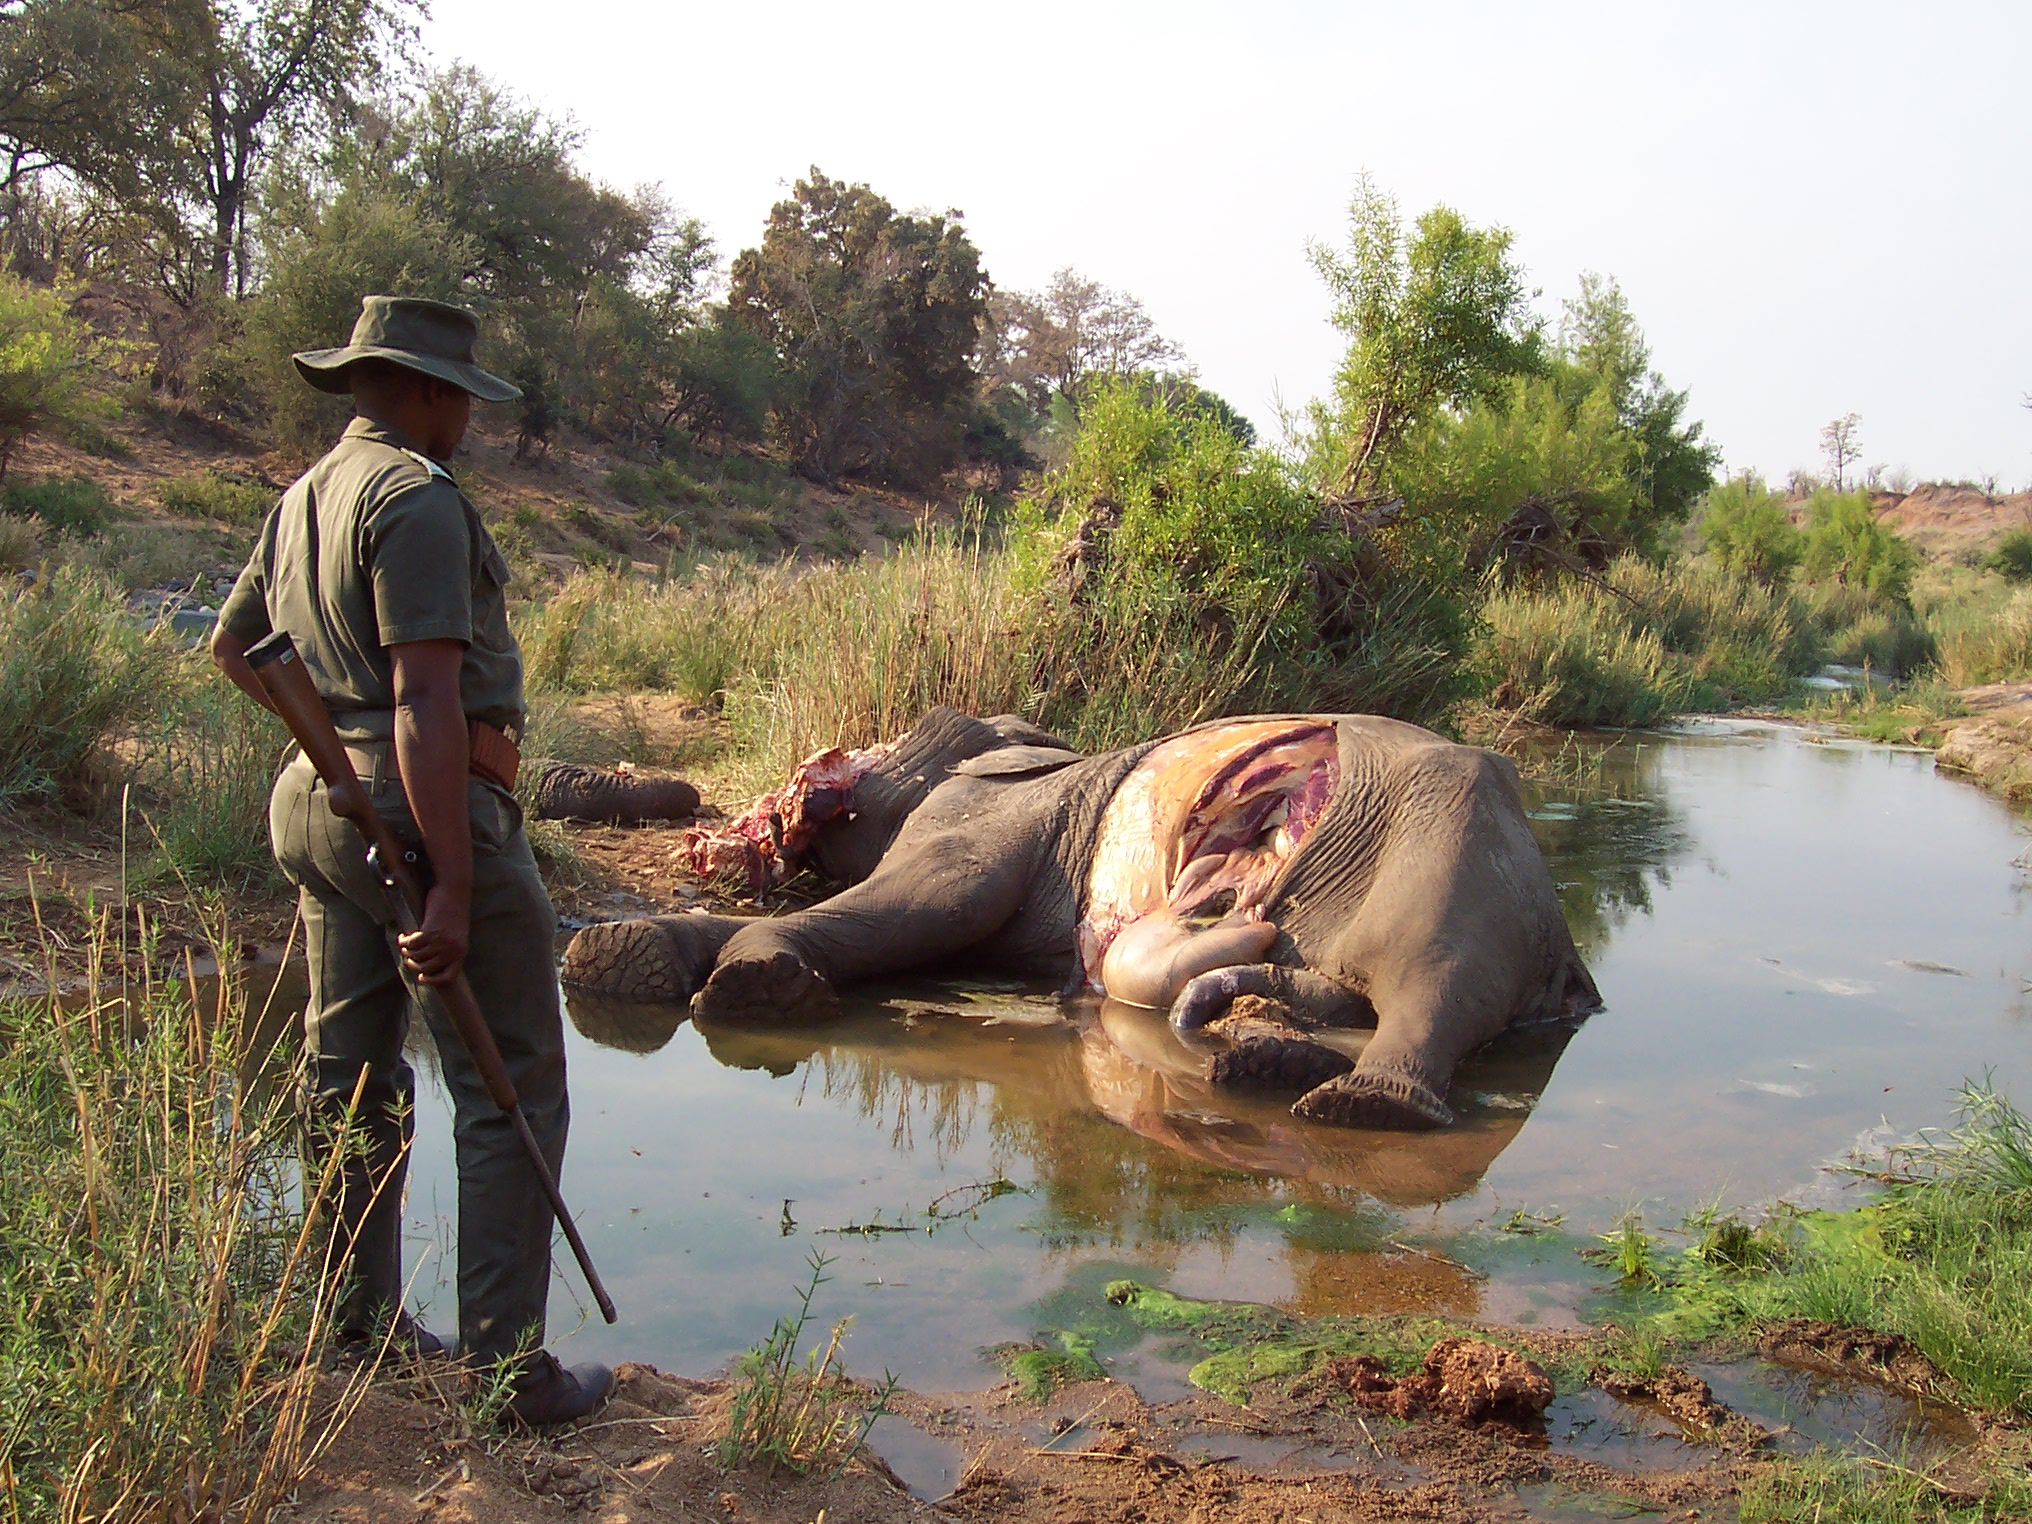 SA man arrested in Moz national park on poaching charge – OSCAP